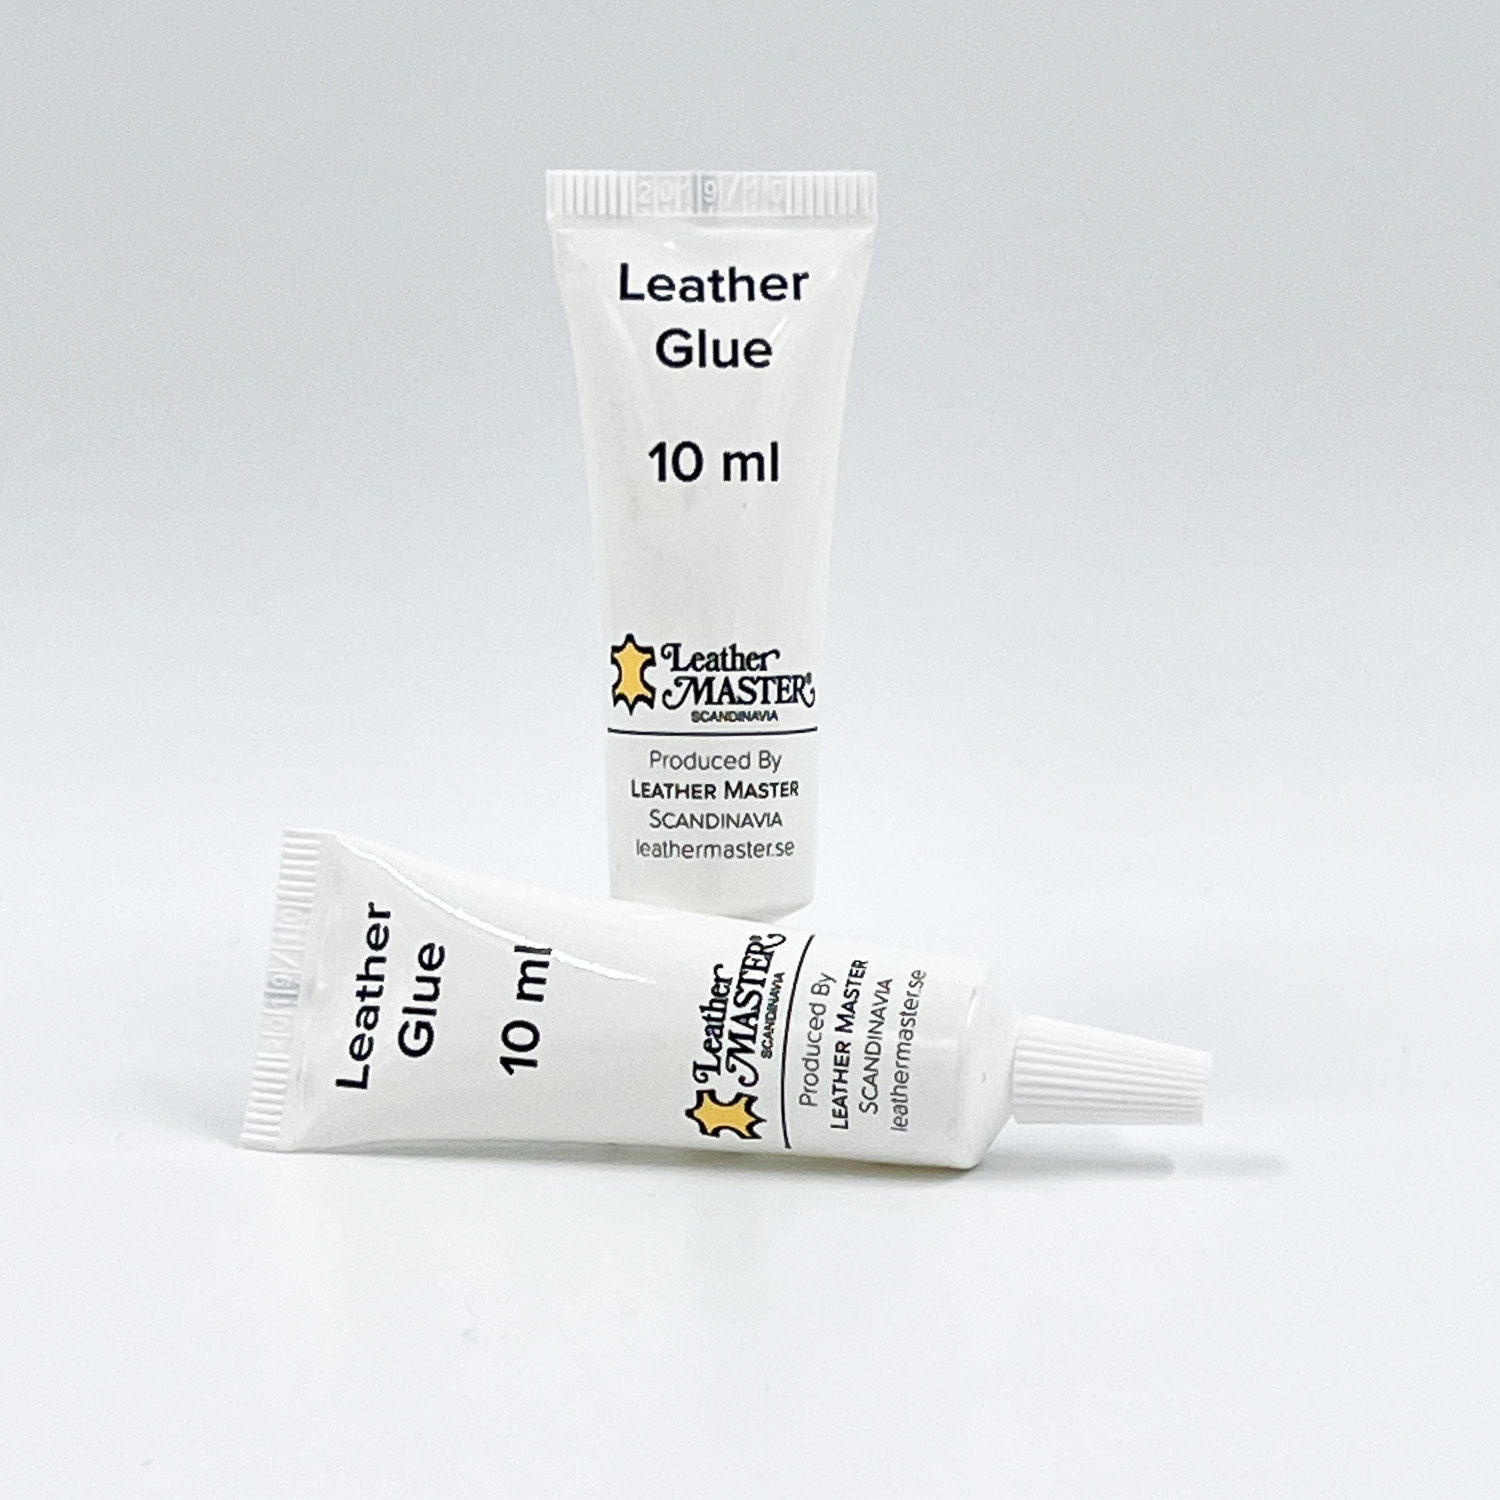 Holika 20g Special Glue for Leather, Leather Repair Glue, used for Bonding Between Leather and Leather, Leather and Substrates of Different Materials